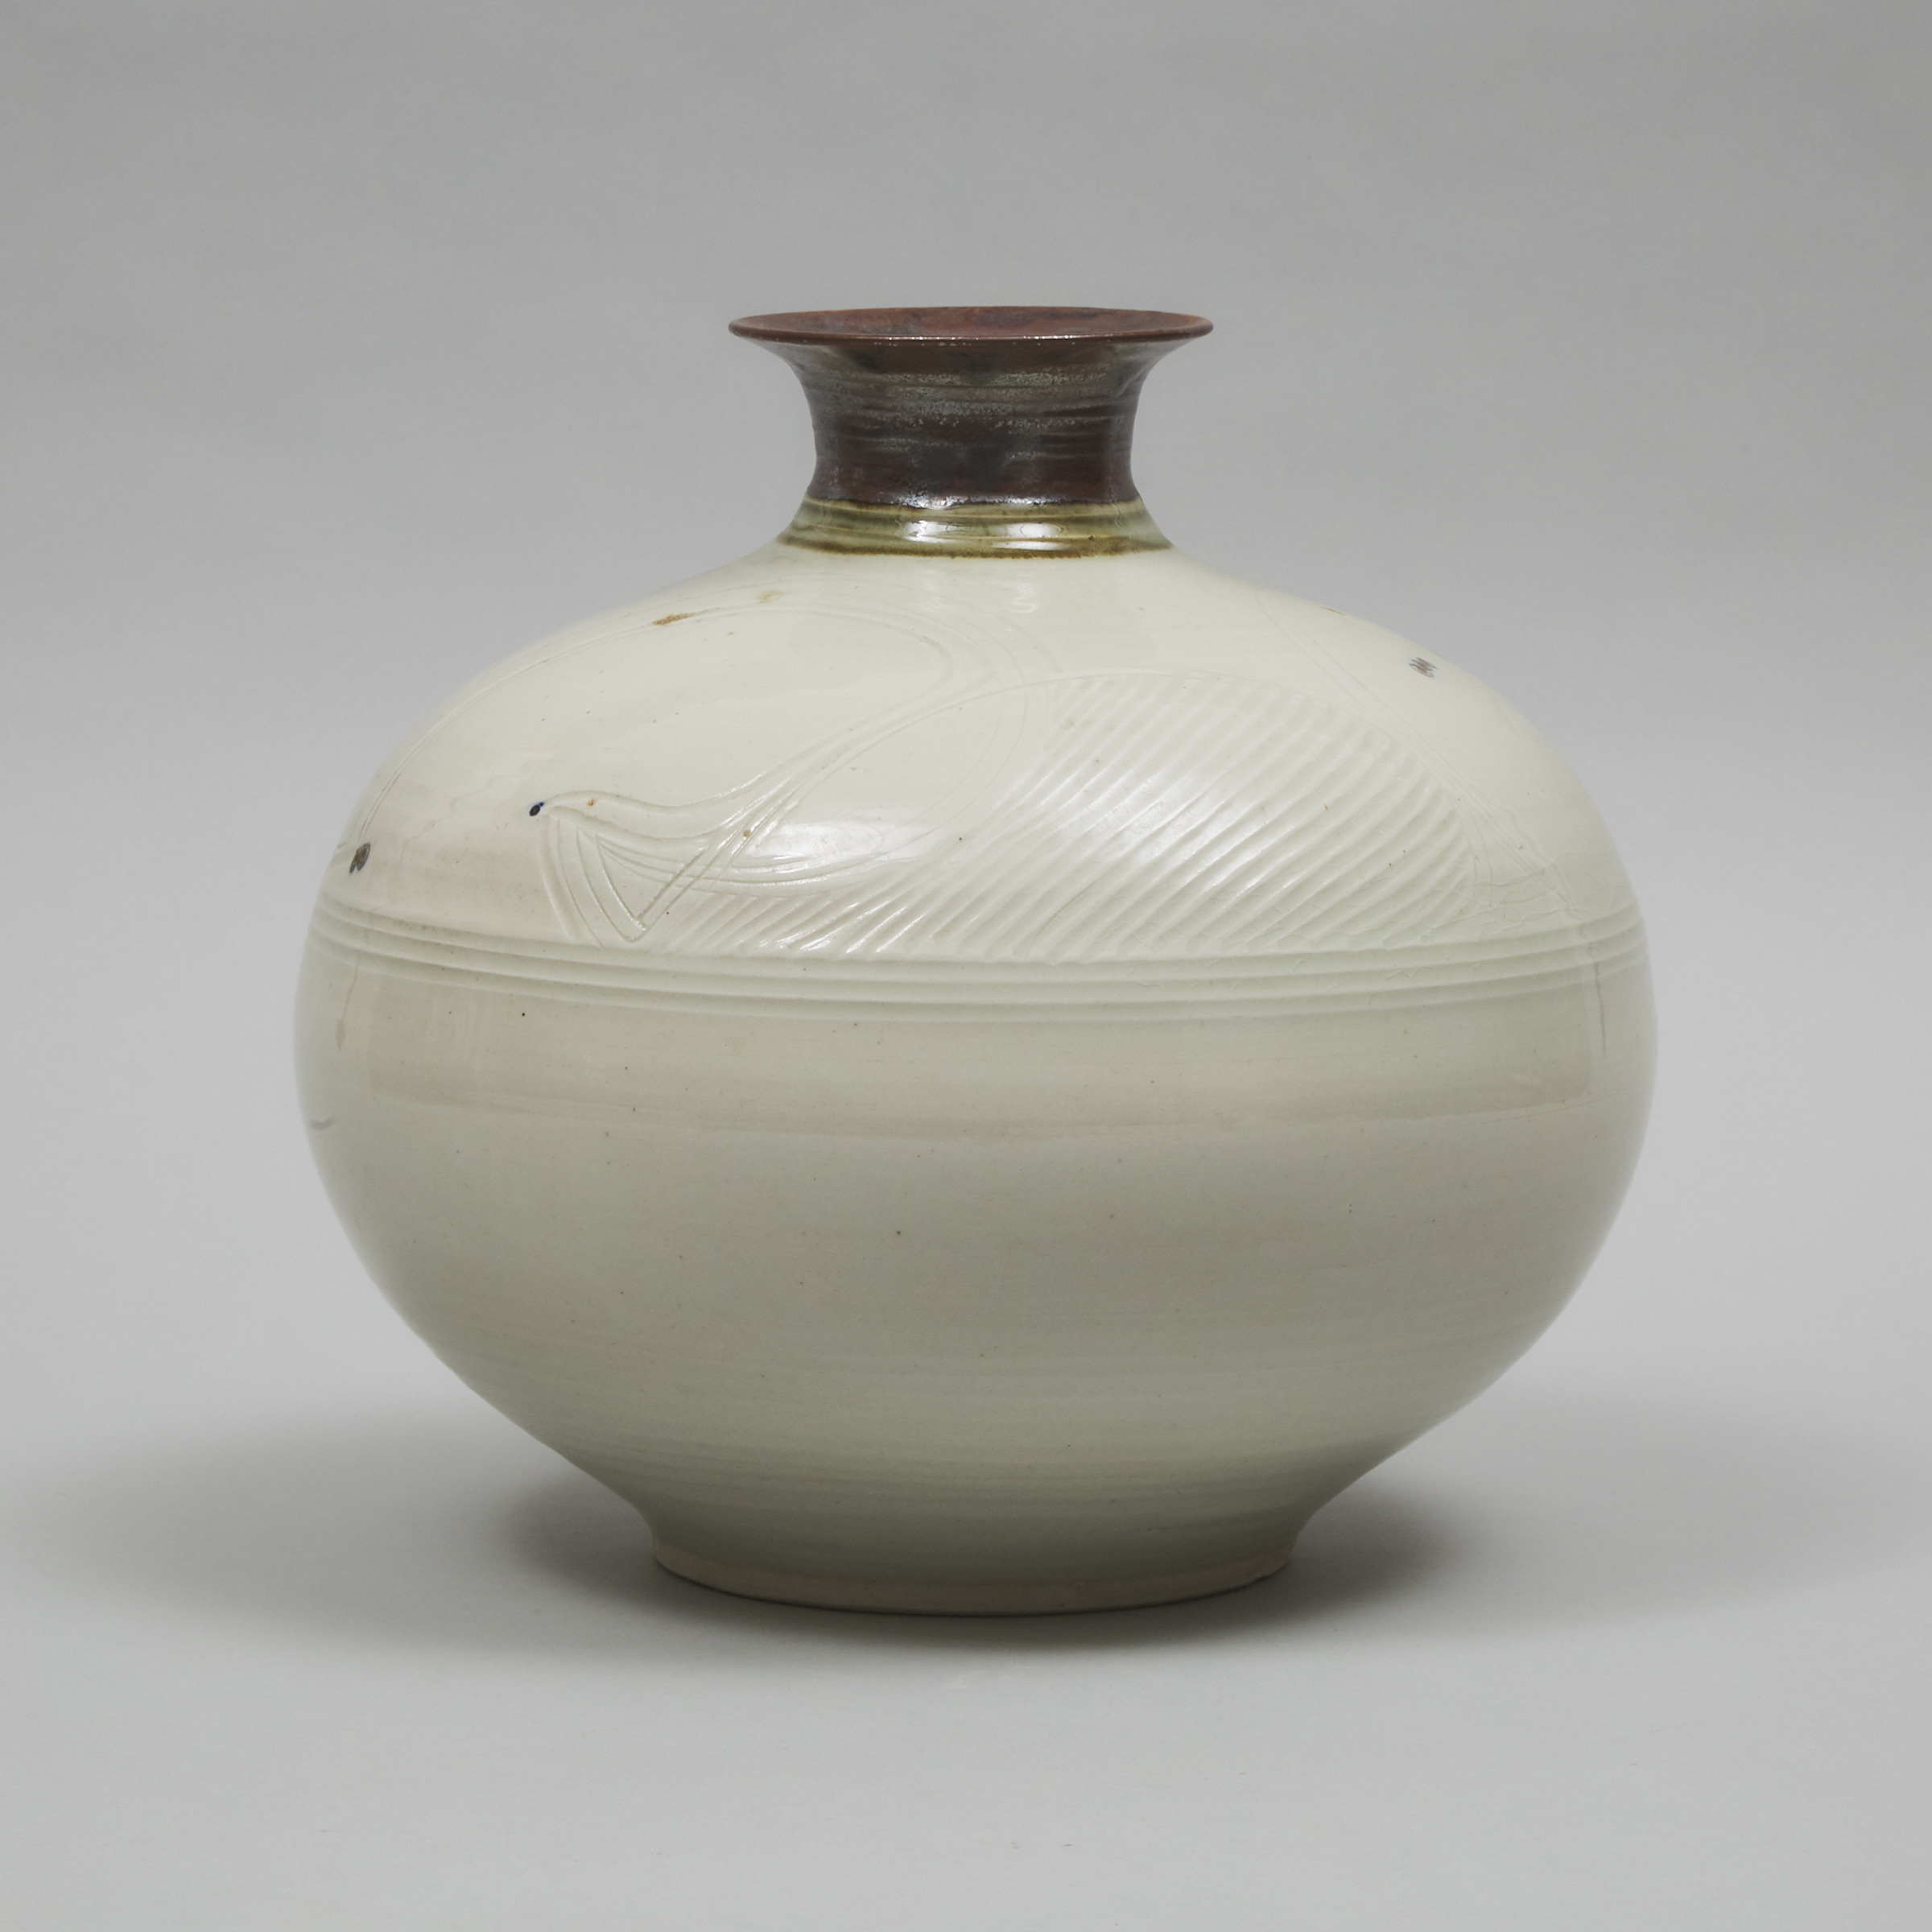 Kayo O'Young (Canadian, b.1950), Incised and Partly Glazed Vase, 1978